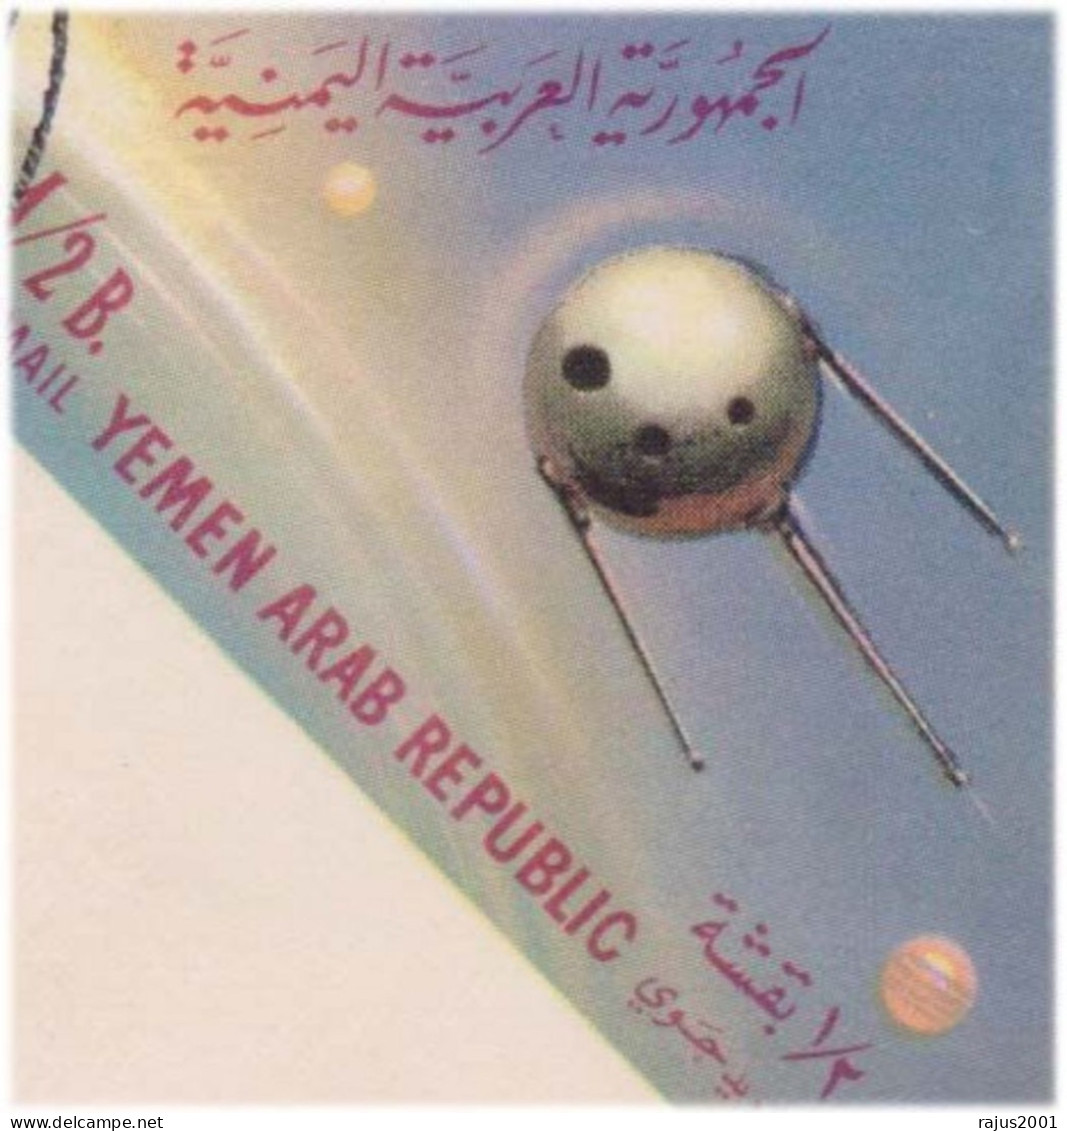 Honouring Astronauts, Exploration, SPUTNIK World First Man Made Space Satellite, Science, Astronomy IMPERF YEMEN FDC - Sterrenkunde